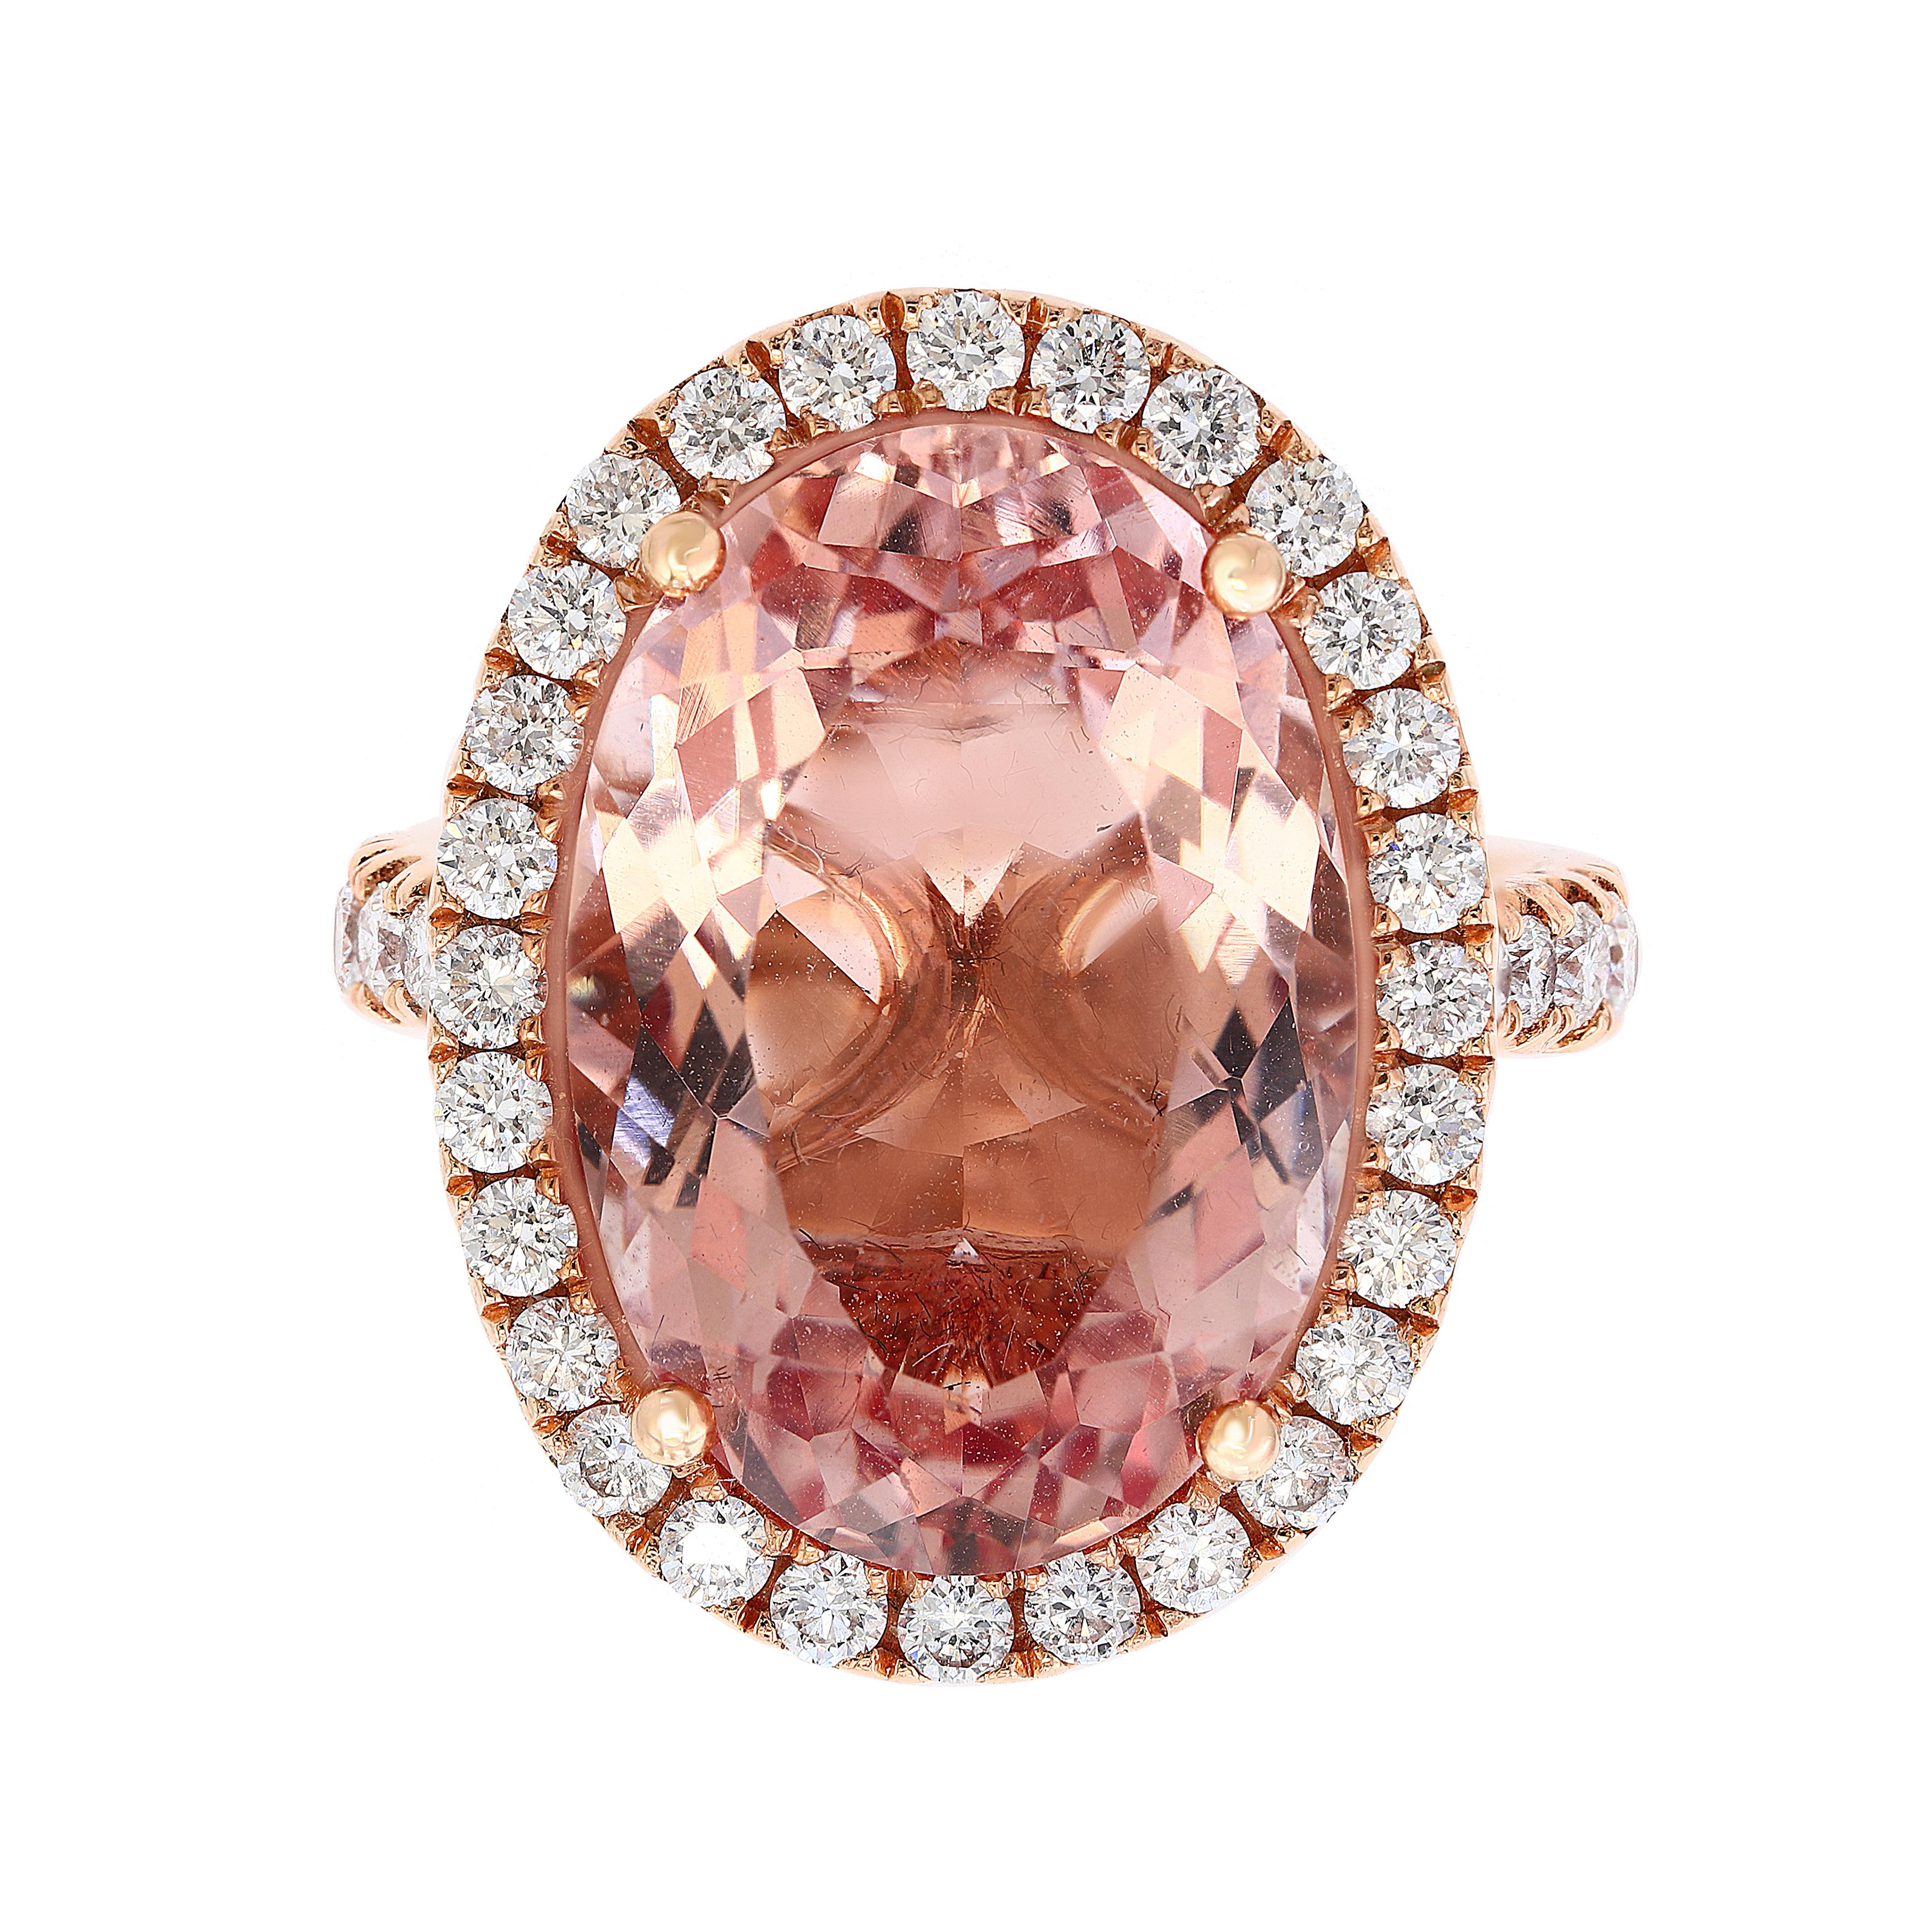 10.70 Carat Oval Shape Morganite and Diamond Cocktail Ring in 18K Rose Gold.
A classic Cocktail Ring of very clean no inclusion Morganite full of luster and shine.
42 Brillaint cut Round Diamonds with Total weight of 1.05. 
Ring Size 6.5 (Its